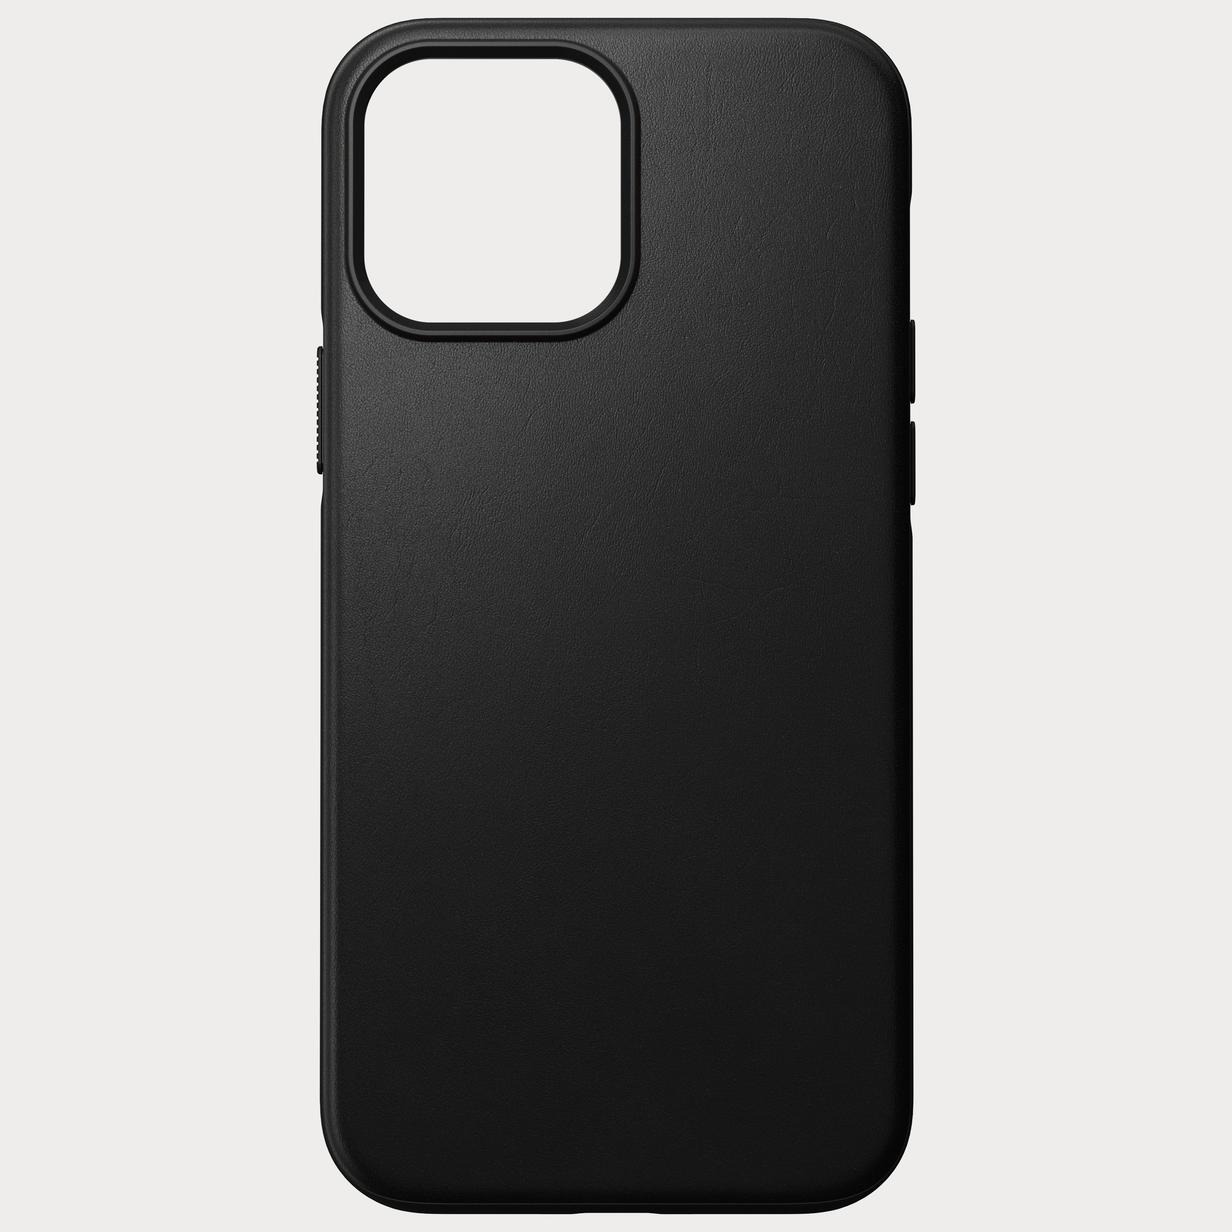 Moment Nomad NM01063285 Modern Leather i Phone Case for i Phone 13 Pro Max Black Leather 01